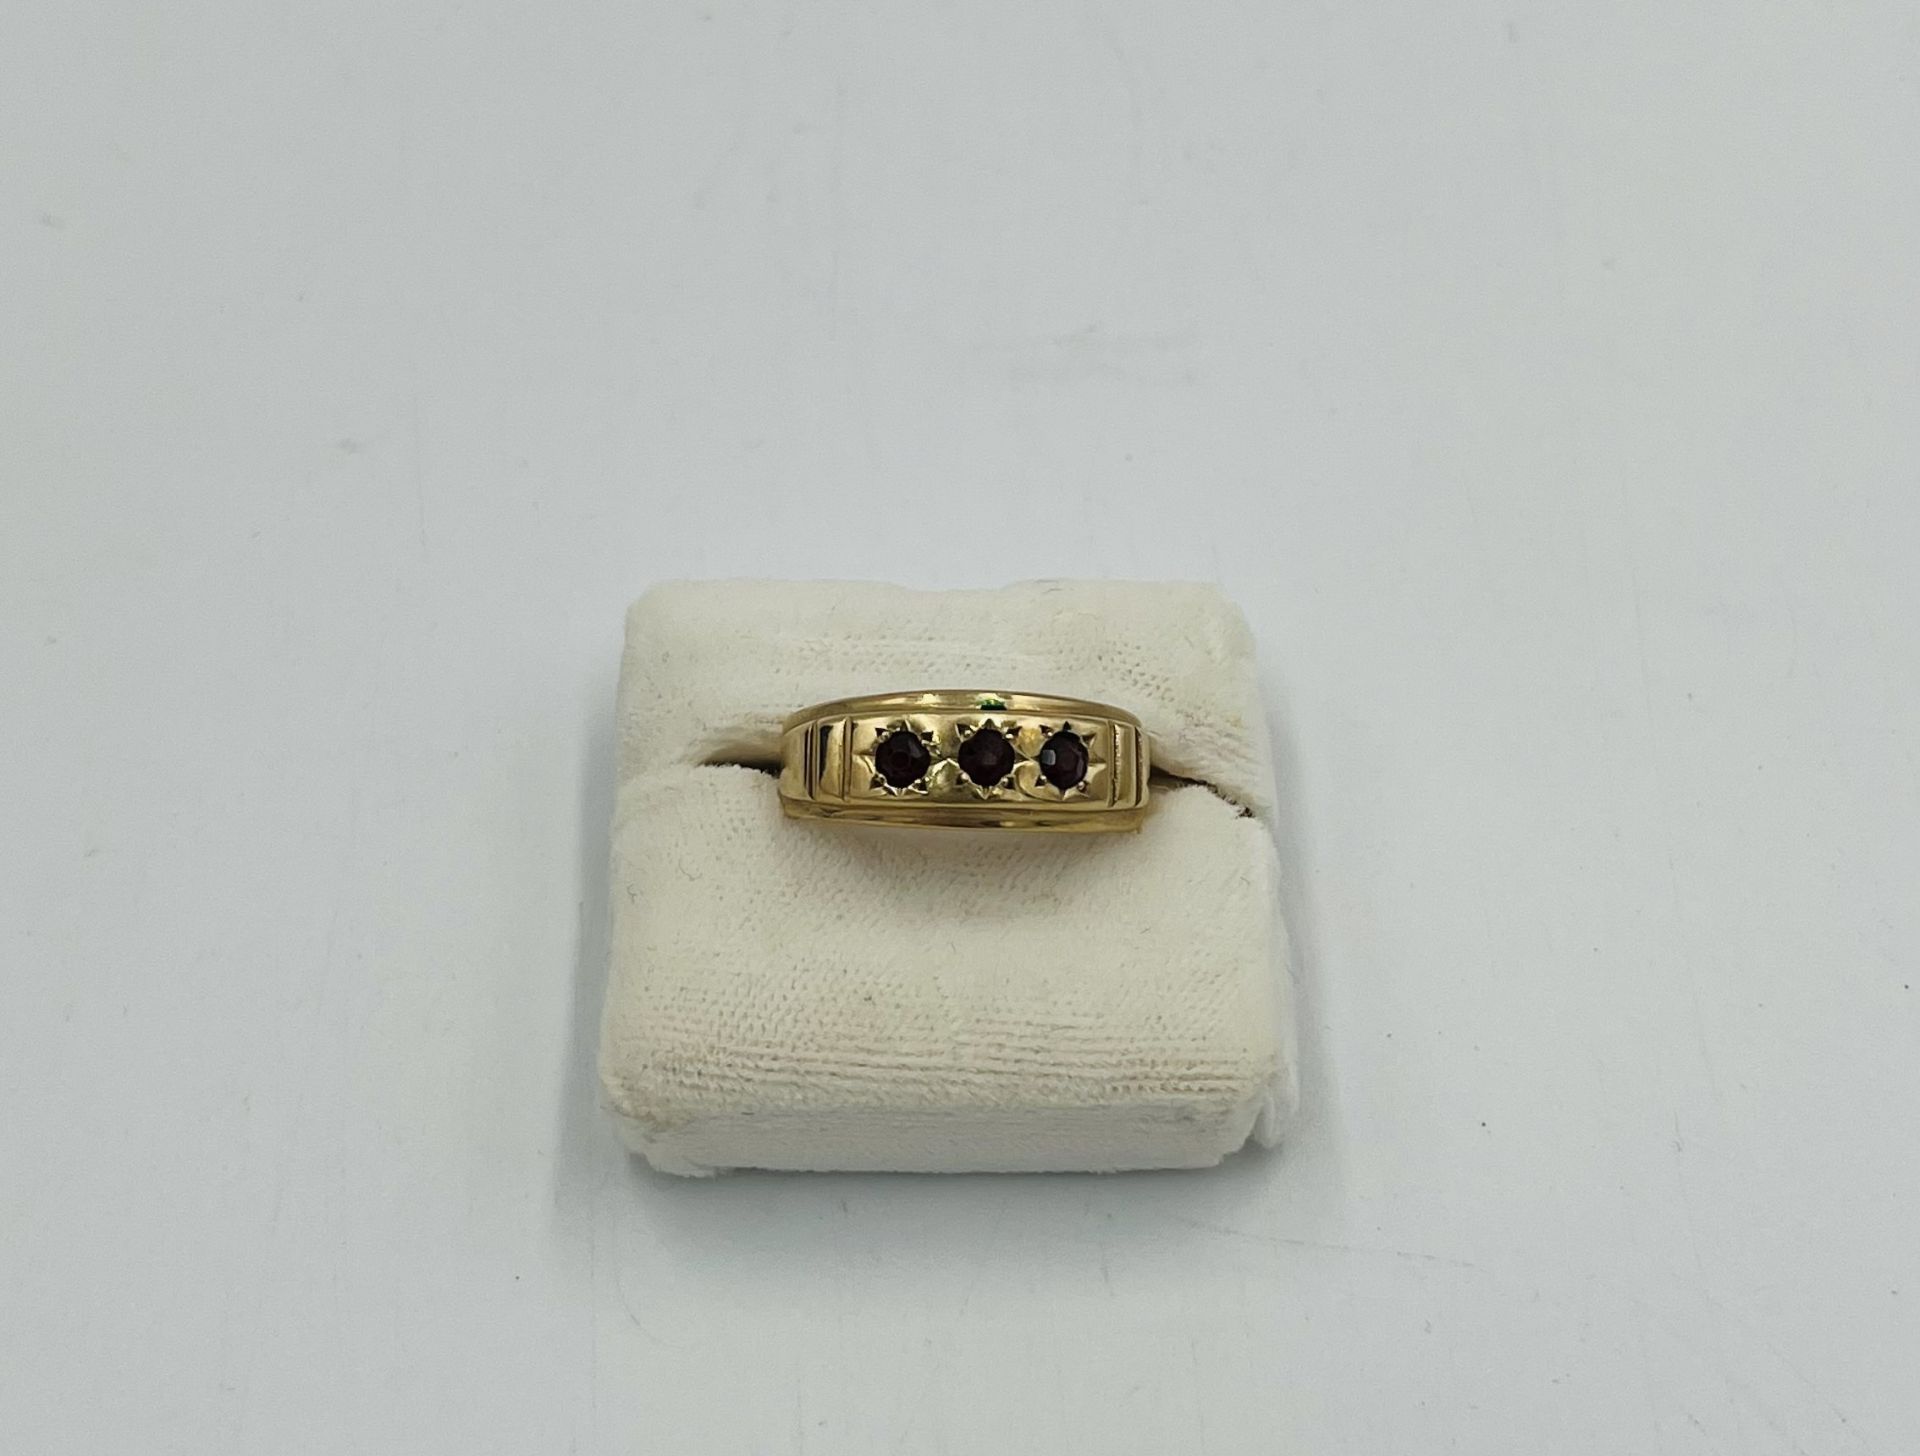 9ct gold ring set with three garnets - Image 2 of 6